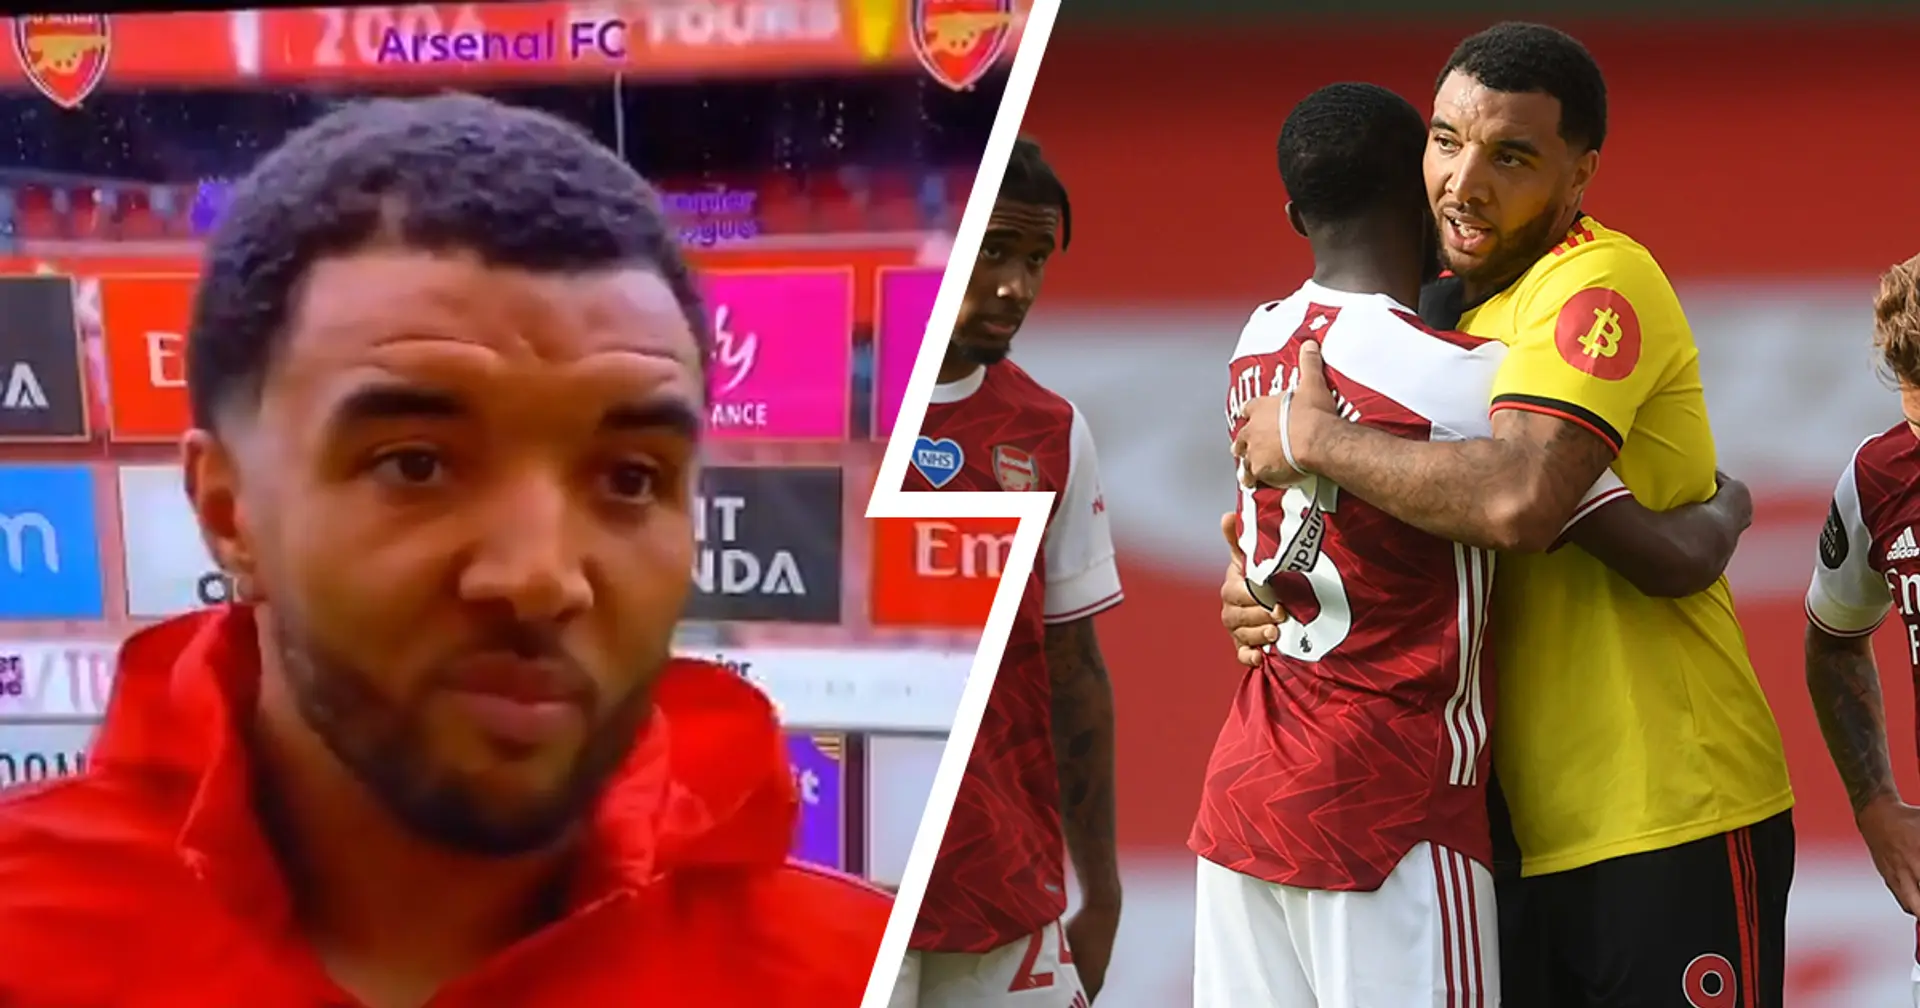 'I'm not that old, you cheeky b**tard': Troey Deeney provides shabby response to retirement question after Watford relegation